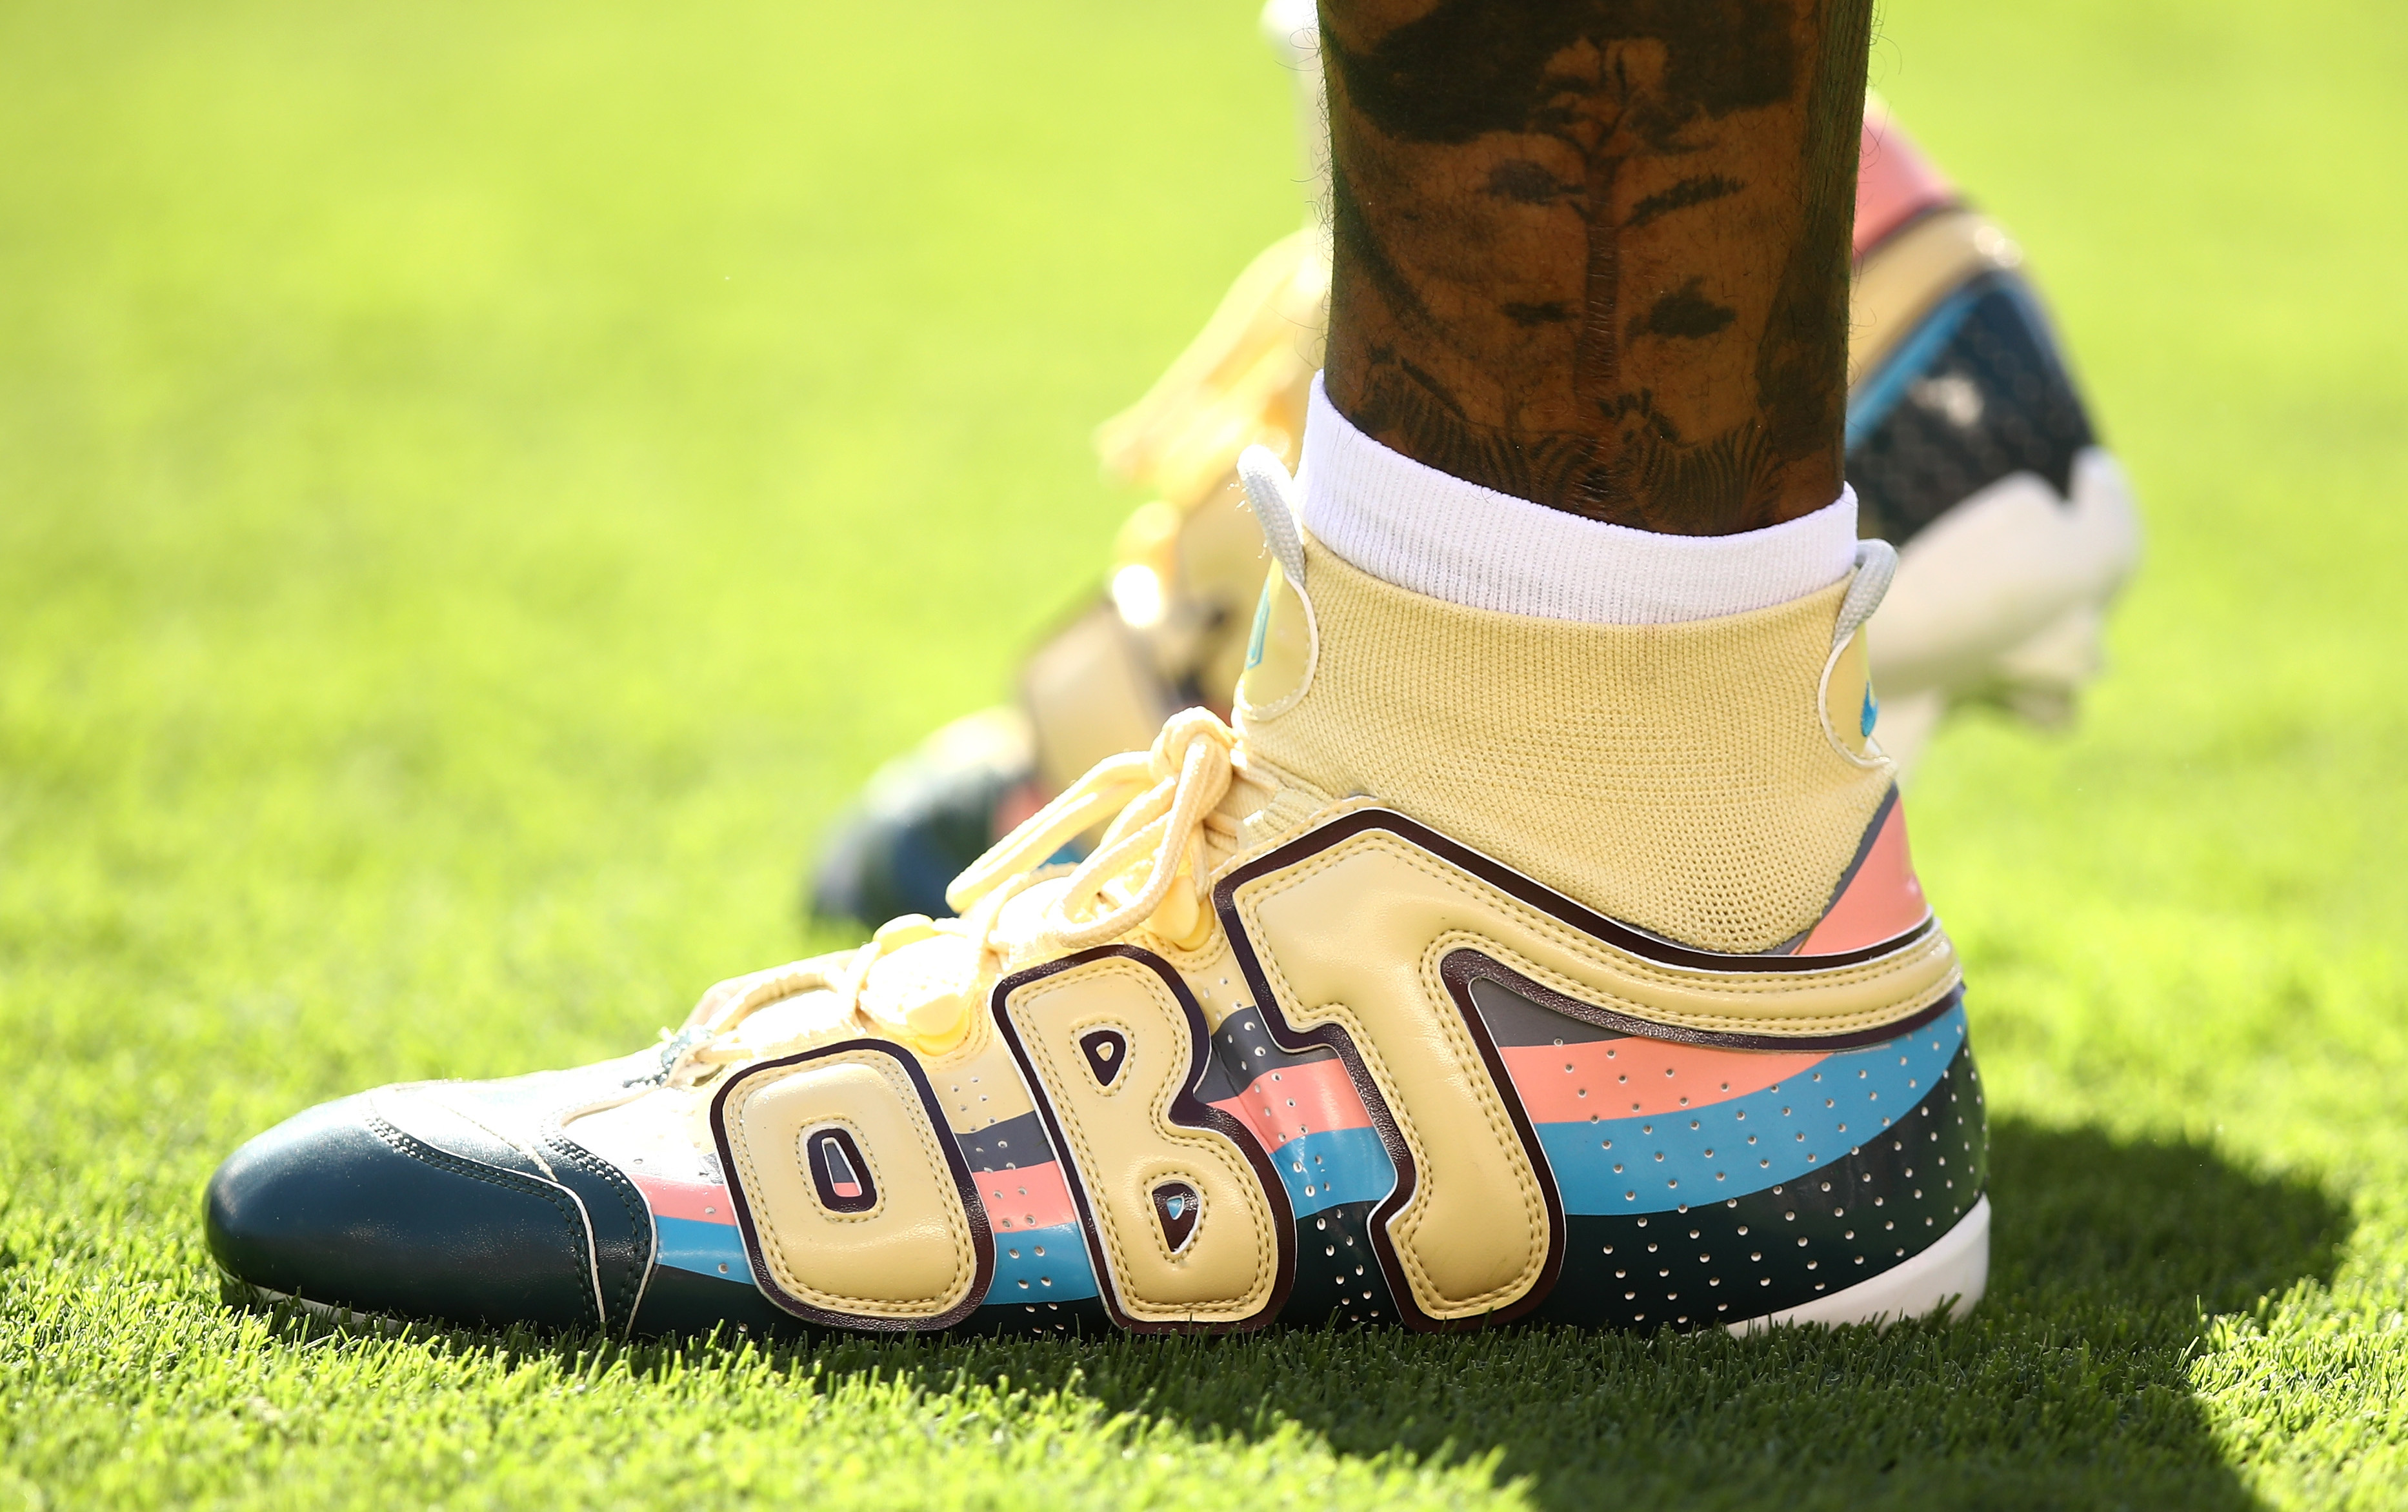 Odell Beckham Jr. Sean Wotherspoon x Nike Cleats